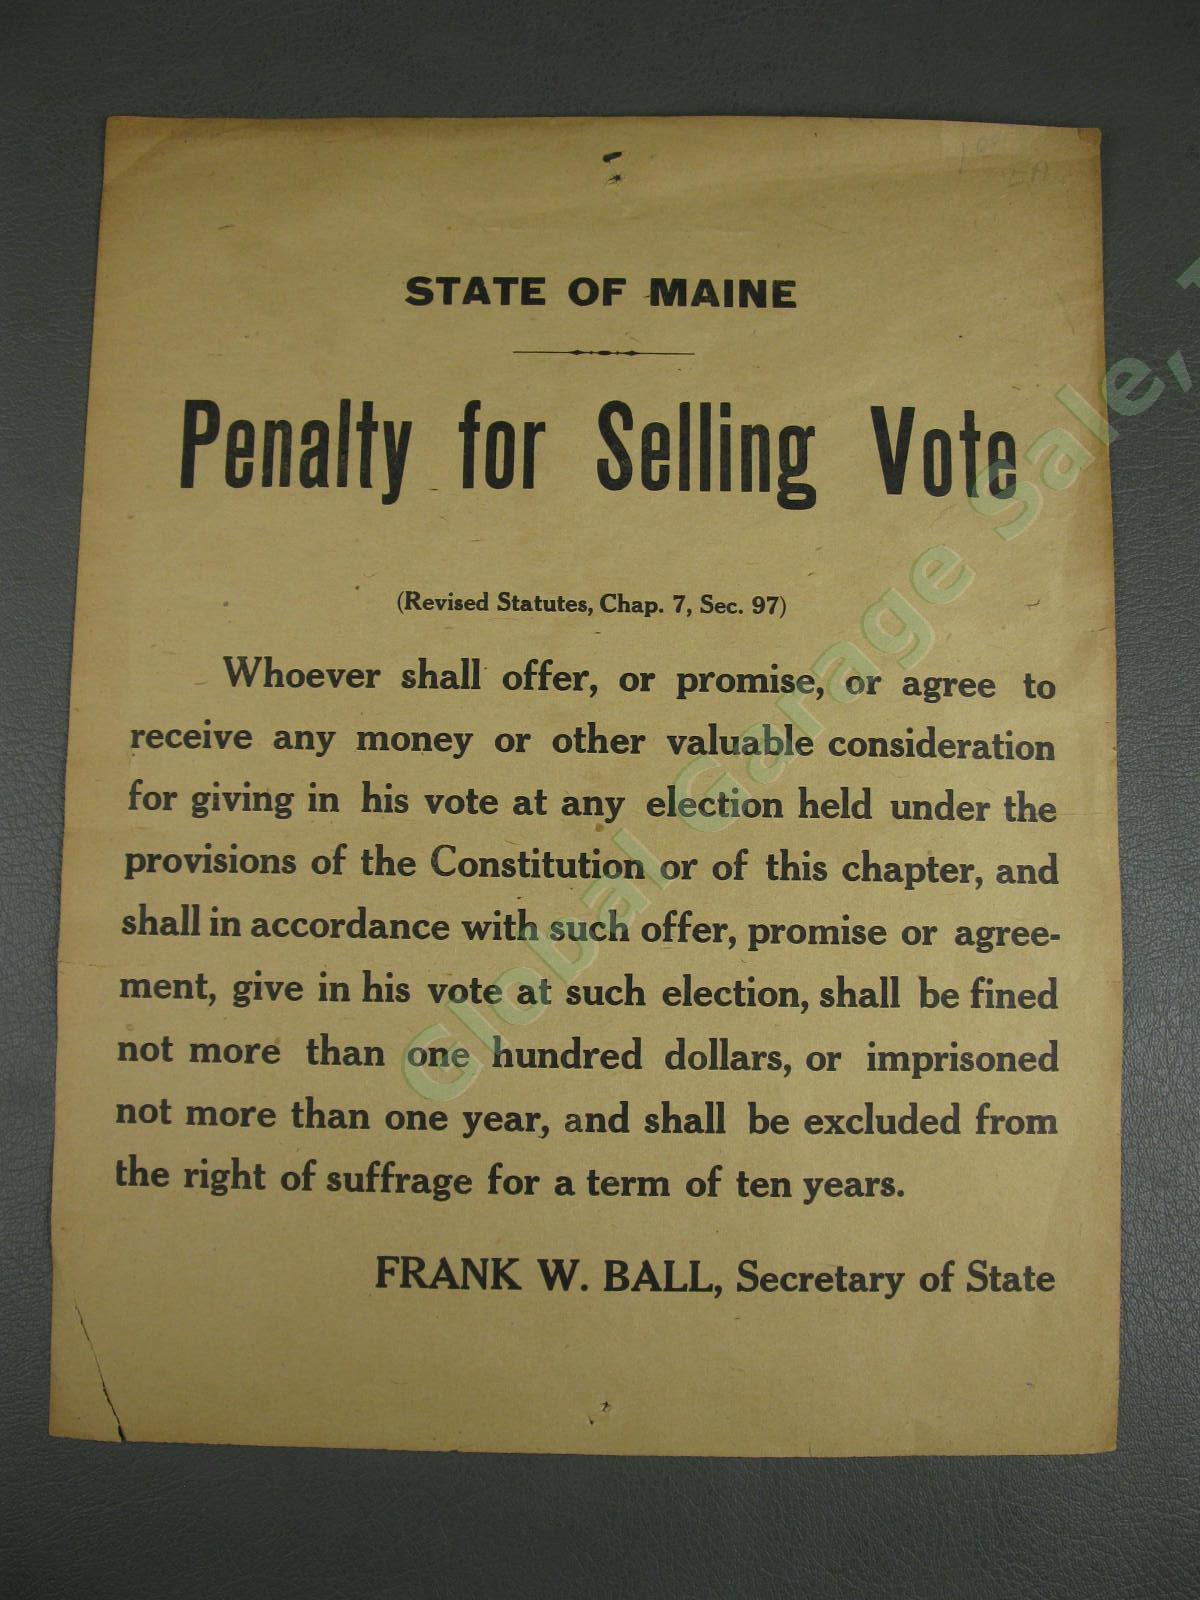 ORIGINAL circa 1920 STATE of MAINE Penalty for Selling Vote Frank W Ball Poster